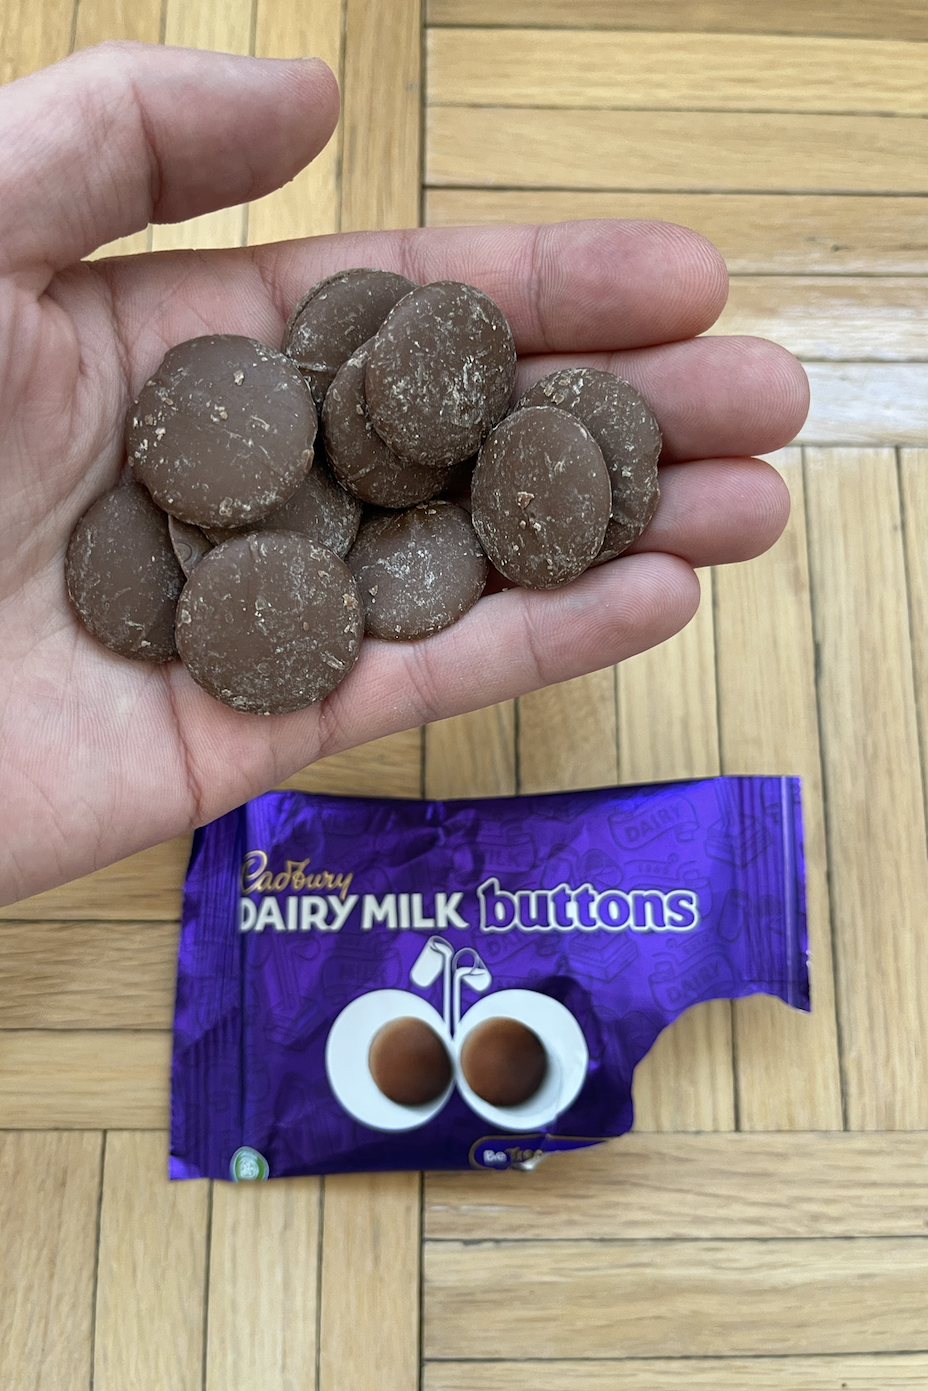 Hand holding Cadbury Dairy Milk Buttons with open packaging below